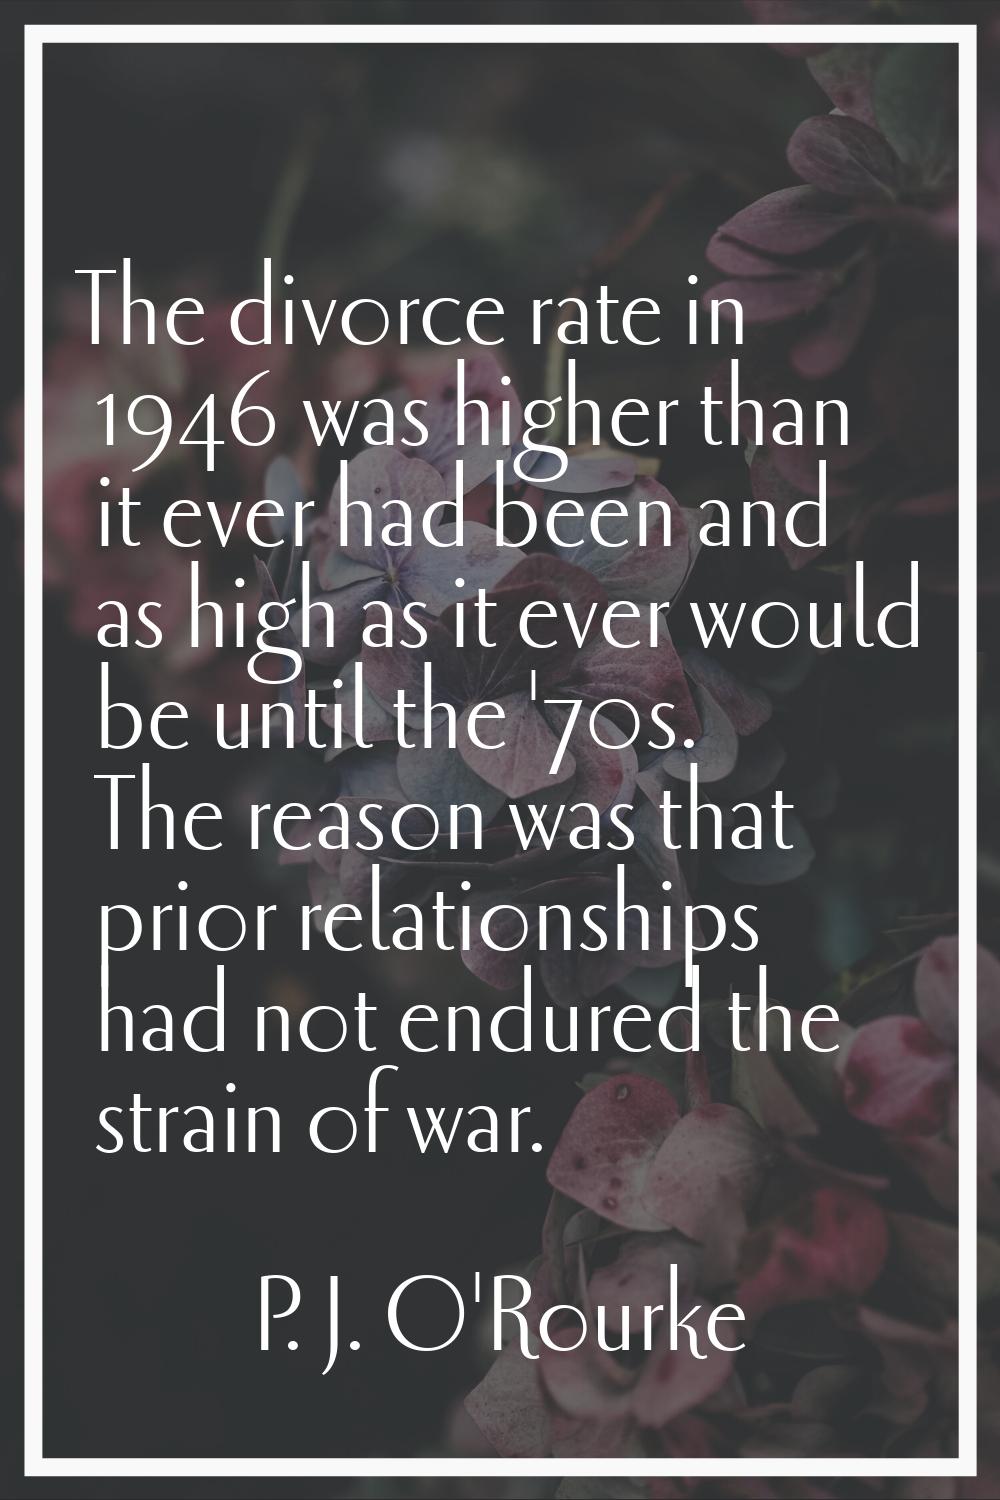 The divorce rate in 1946 was higher than it ever had been and as high as it ever would be until the